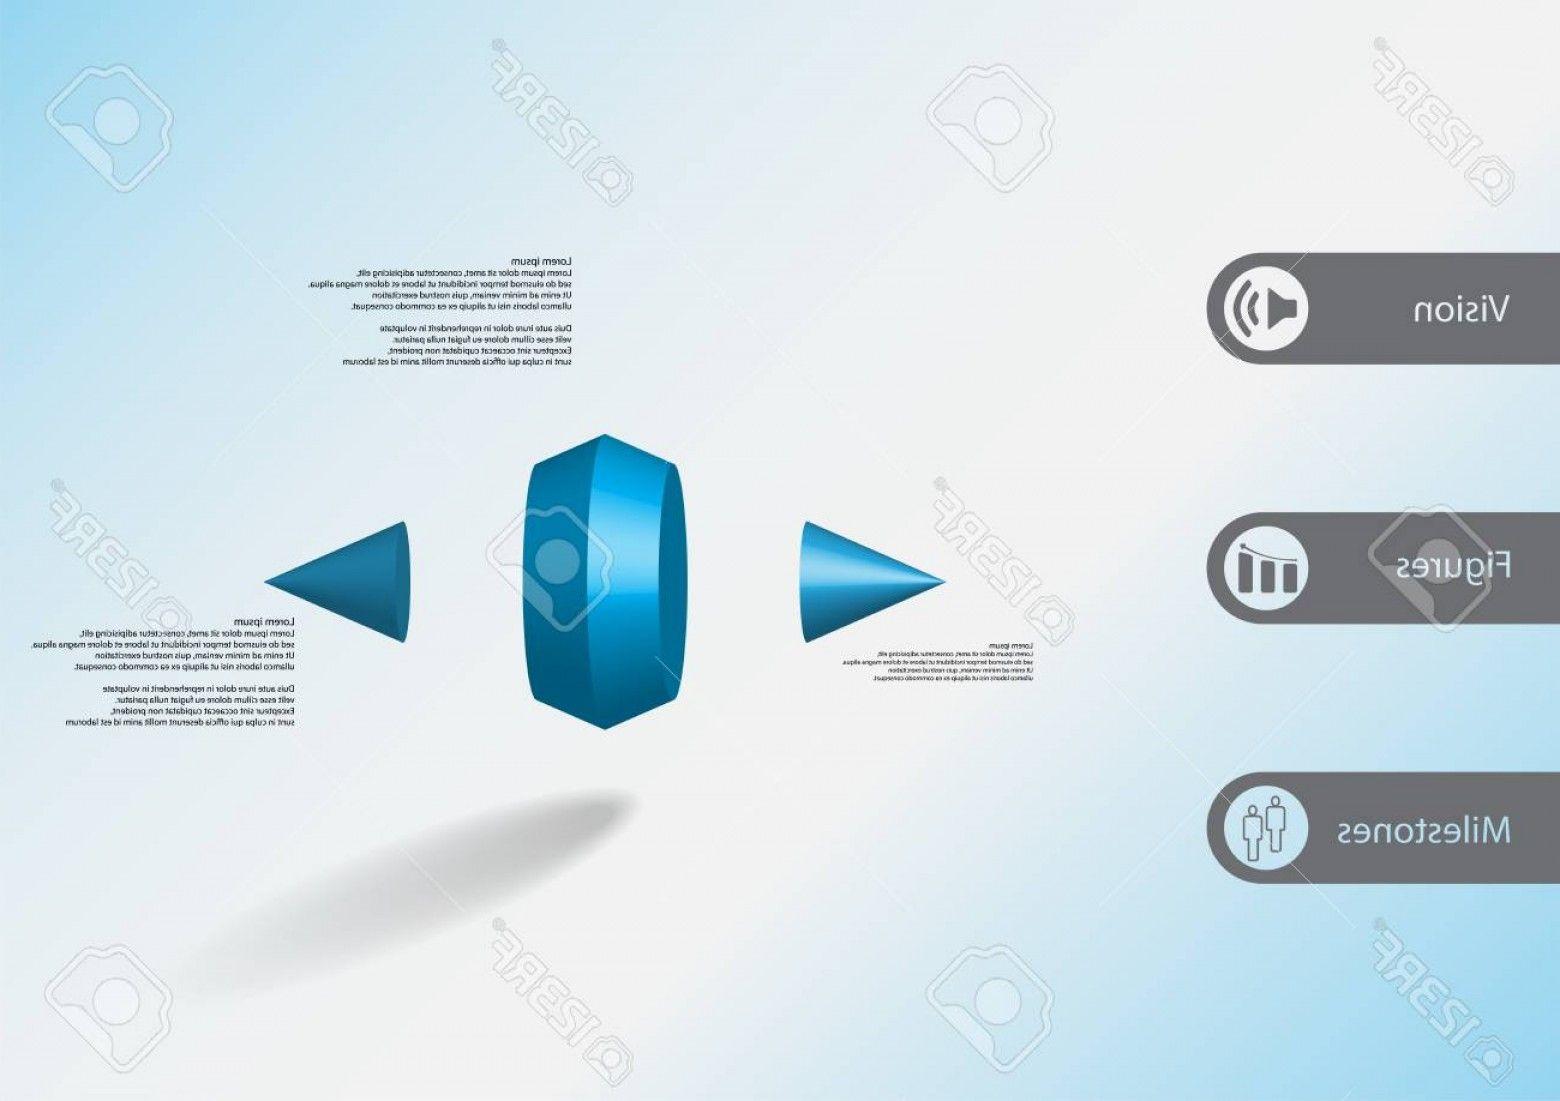 Three Blue Bar Logo - Photostock Vector D Illustration Info Graphic Template With Motif Of ...